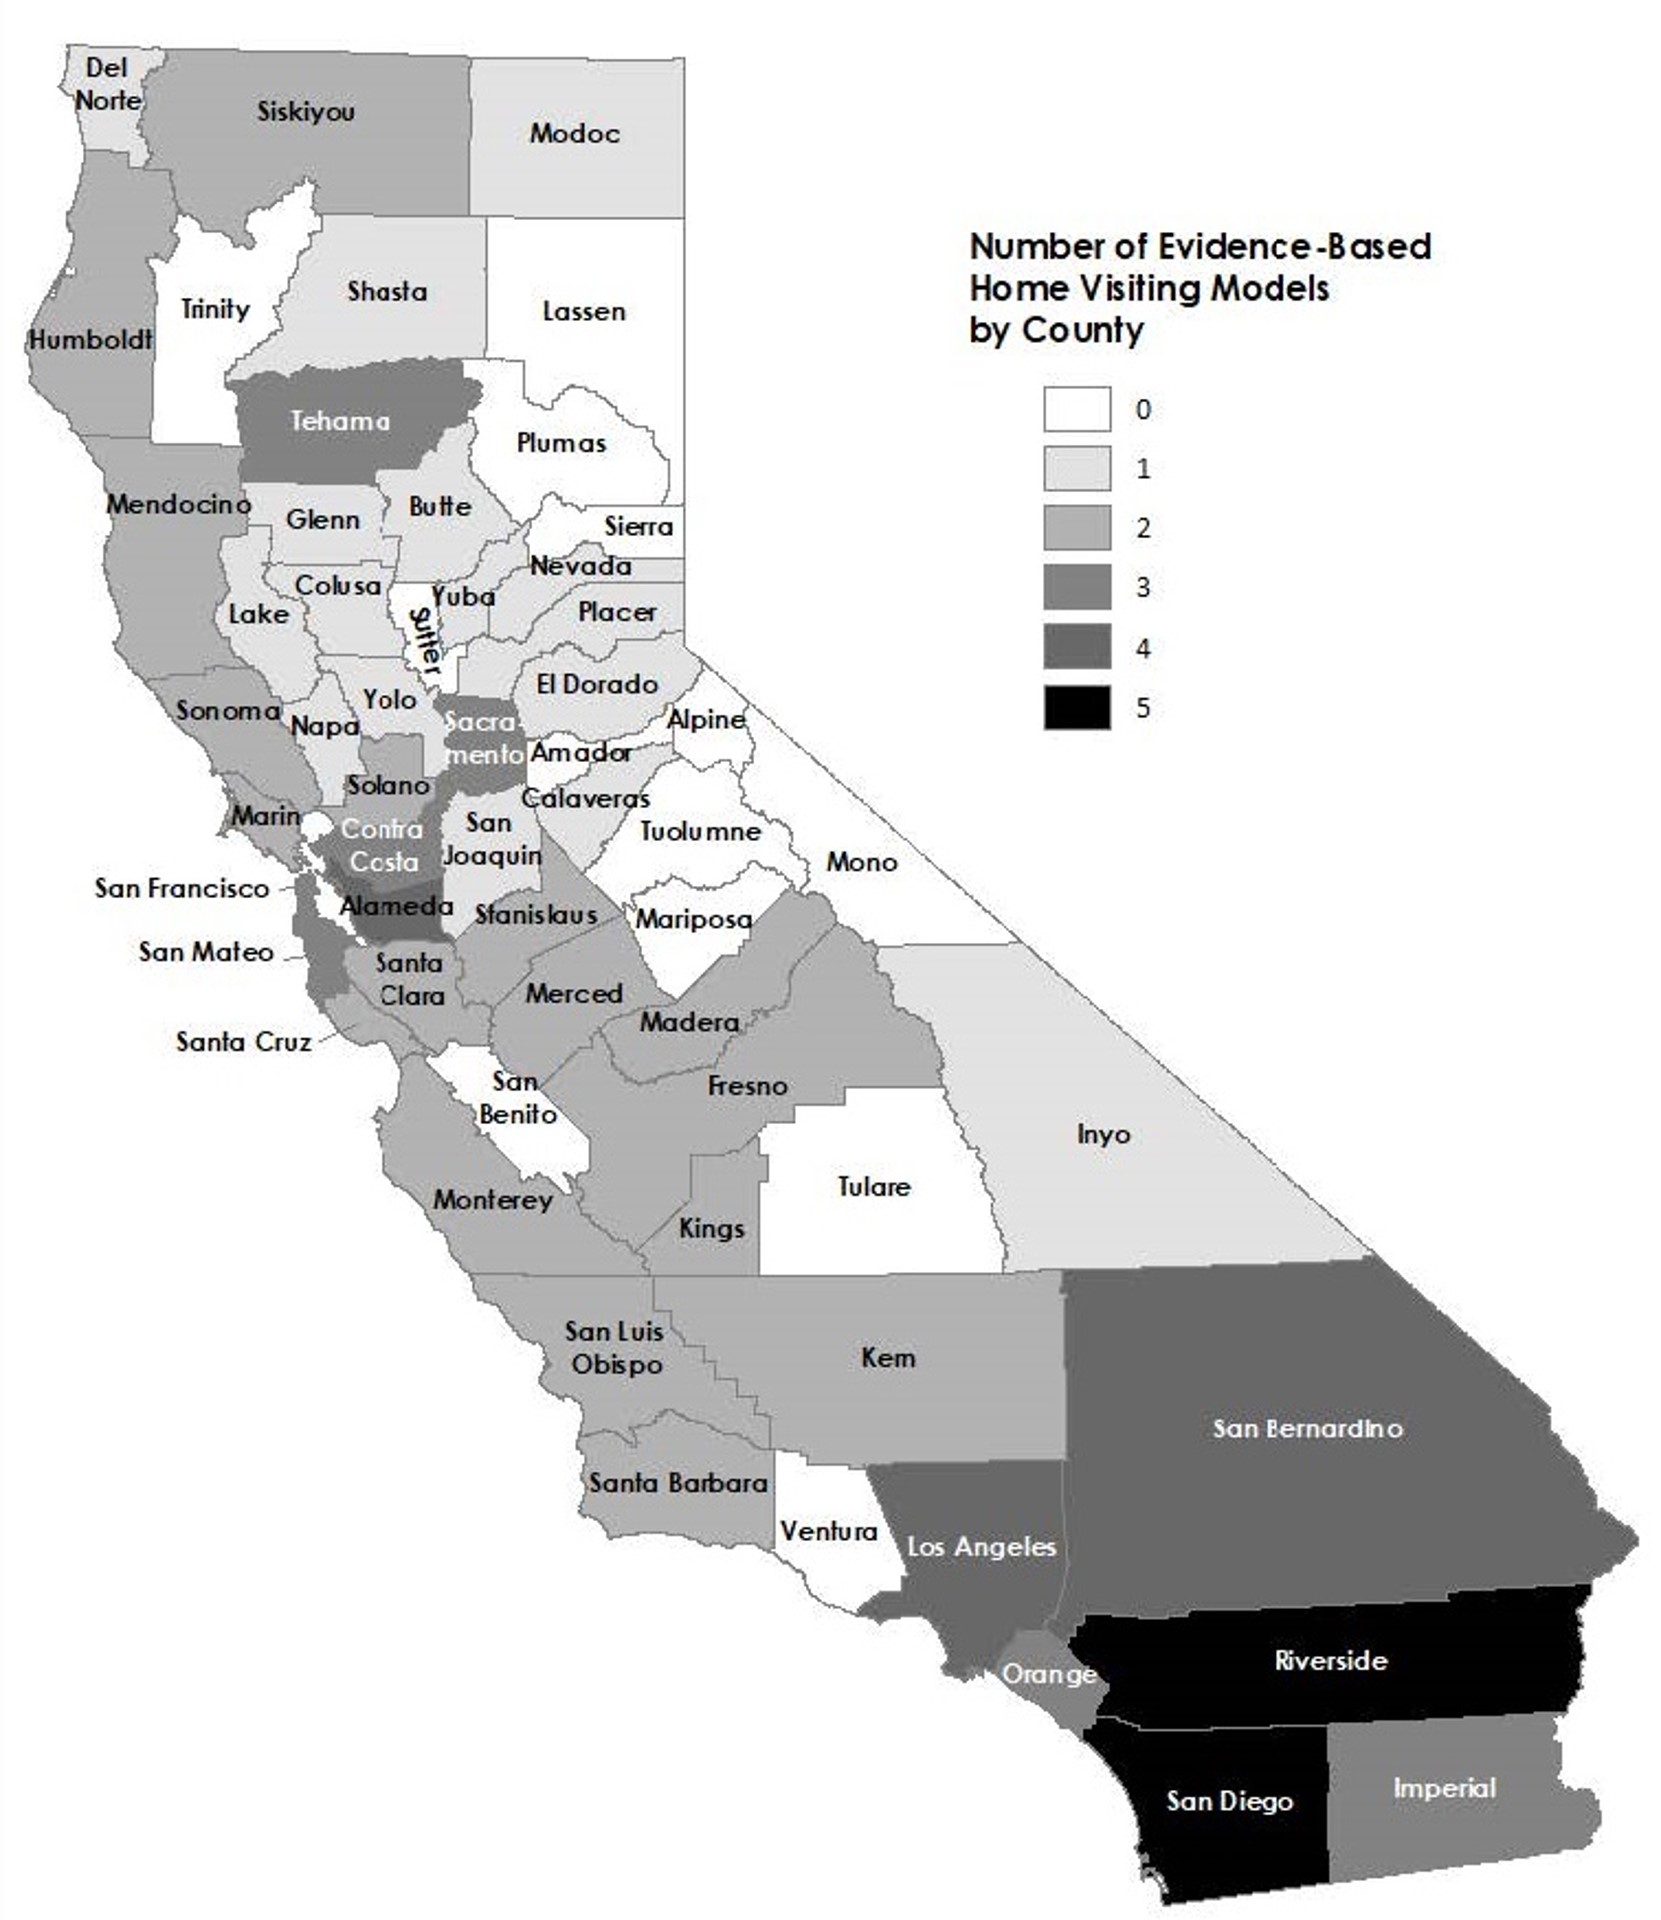 California map conveying number of evidence-based Home Visiting models by county.